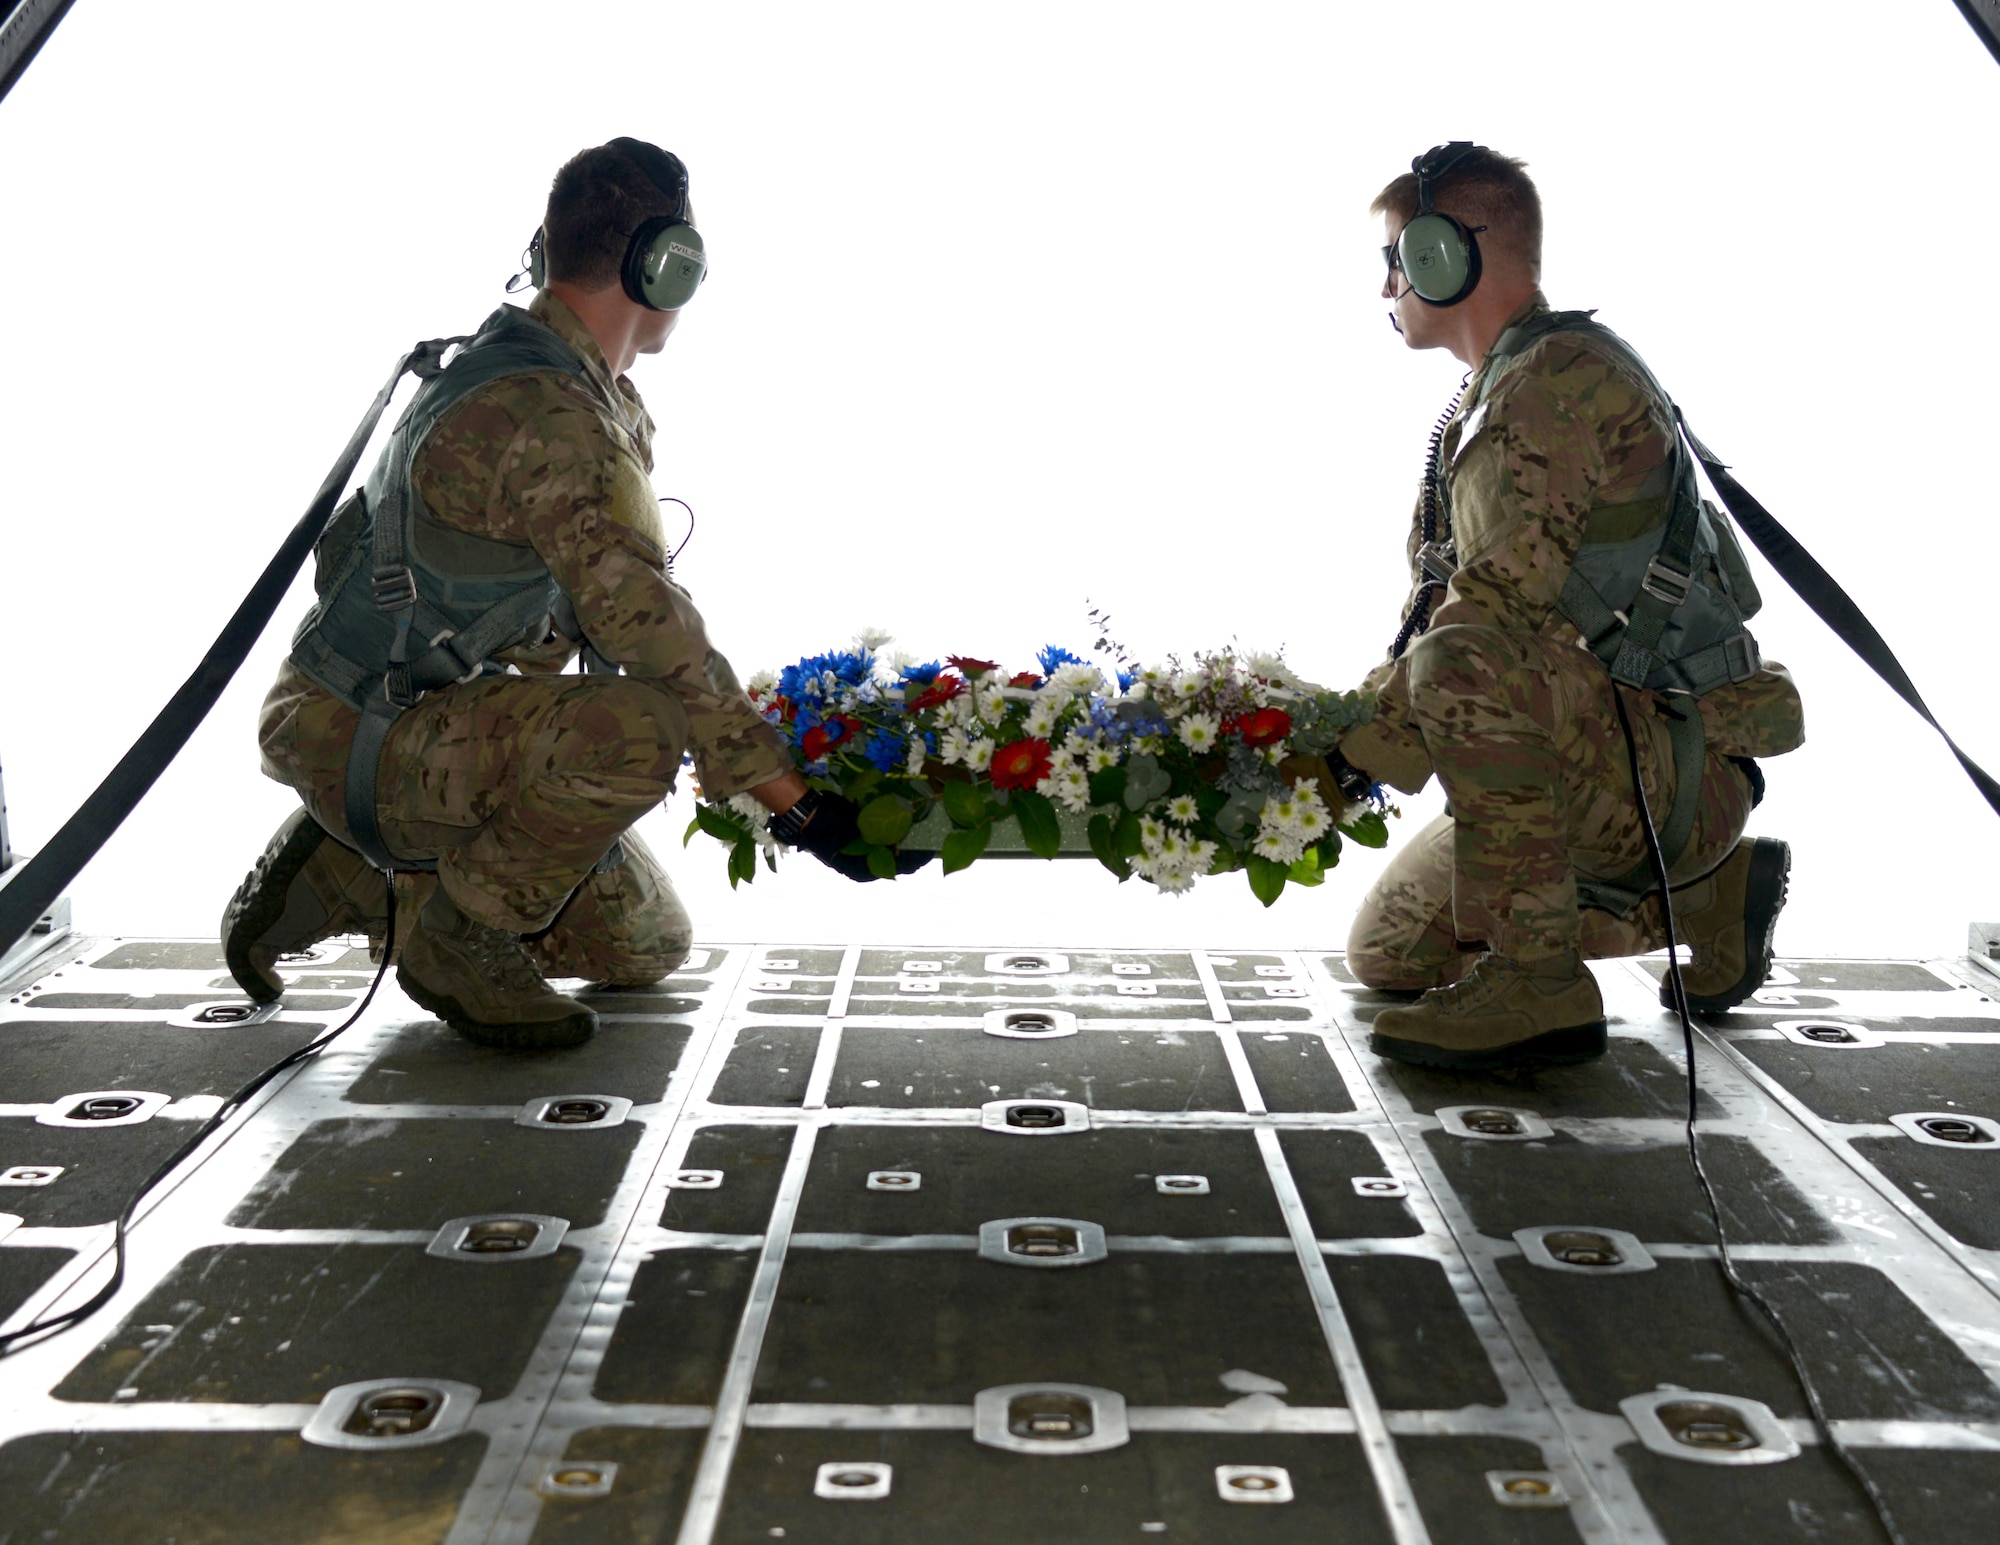 From left, Staff Sgt. Michael Wilson and Staff Sgt. Anthony Bliss, both loadmasters from the 1st Special Operations Squadron, prepare to drop the wreath from an MC-130H Combat Talon II off the coast of the Philippines Feb. 26, 2014 in memory of those who died in the crash of Stray 59.  The flight honors those who were lost 33 years ago when a 1st SOS MC-130E, call sign STRAY 59, crashed during an exercise killing eight crew members and 15 passengers. (U. S. Air Force photo by Tech. Sgt. Kristine Dreyer) 